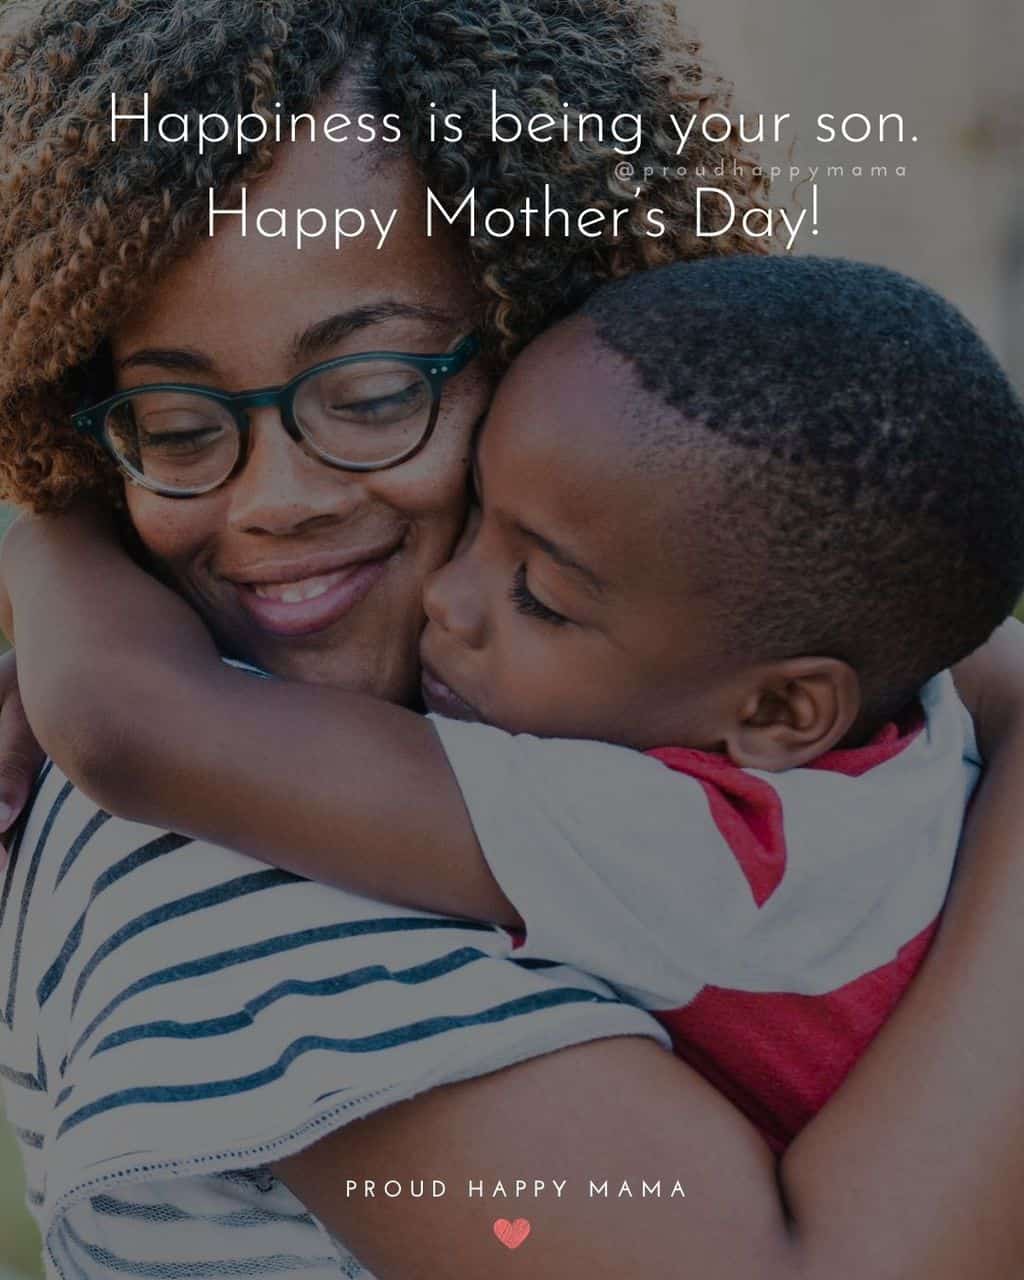 Happy Mothers Day Quotes From Son - Happiness is being your son. Happy Mother’s Day!’